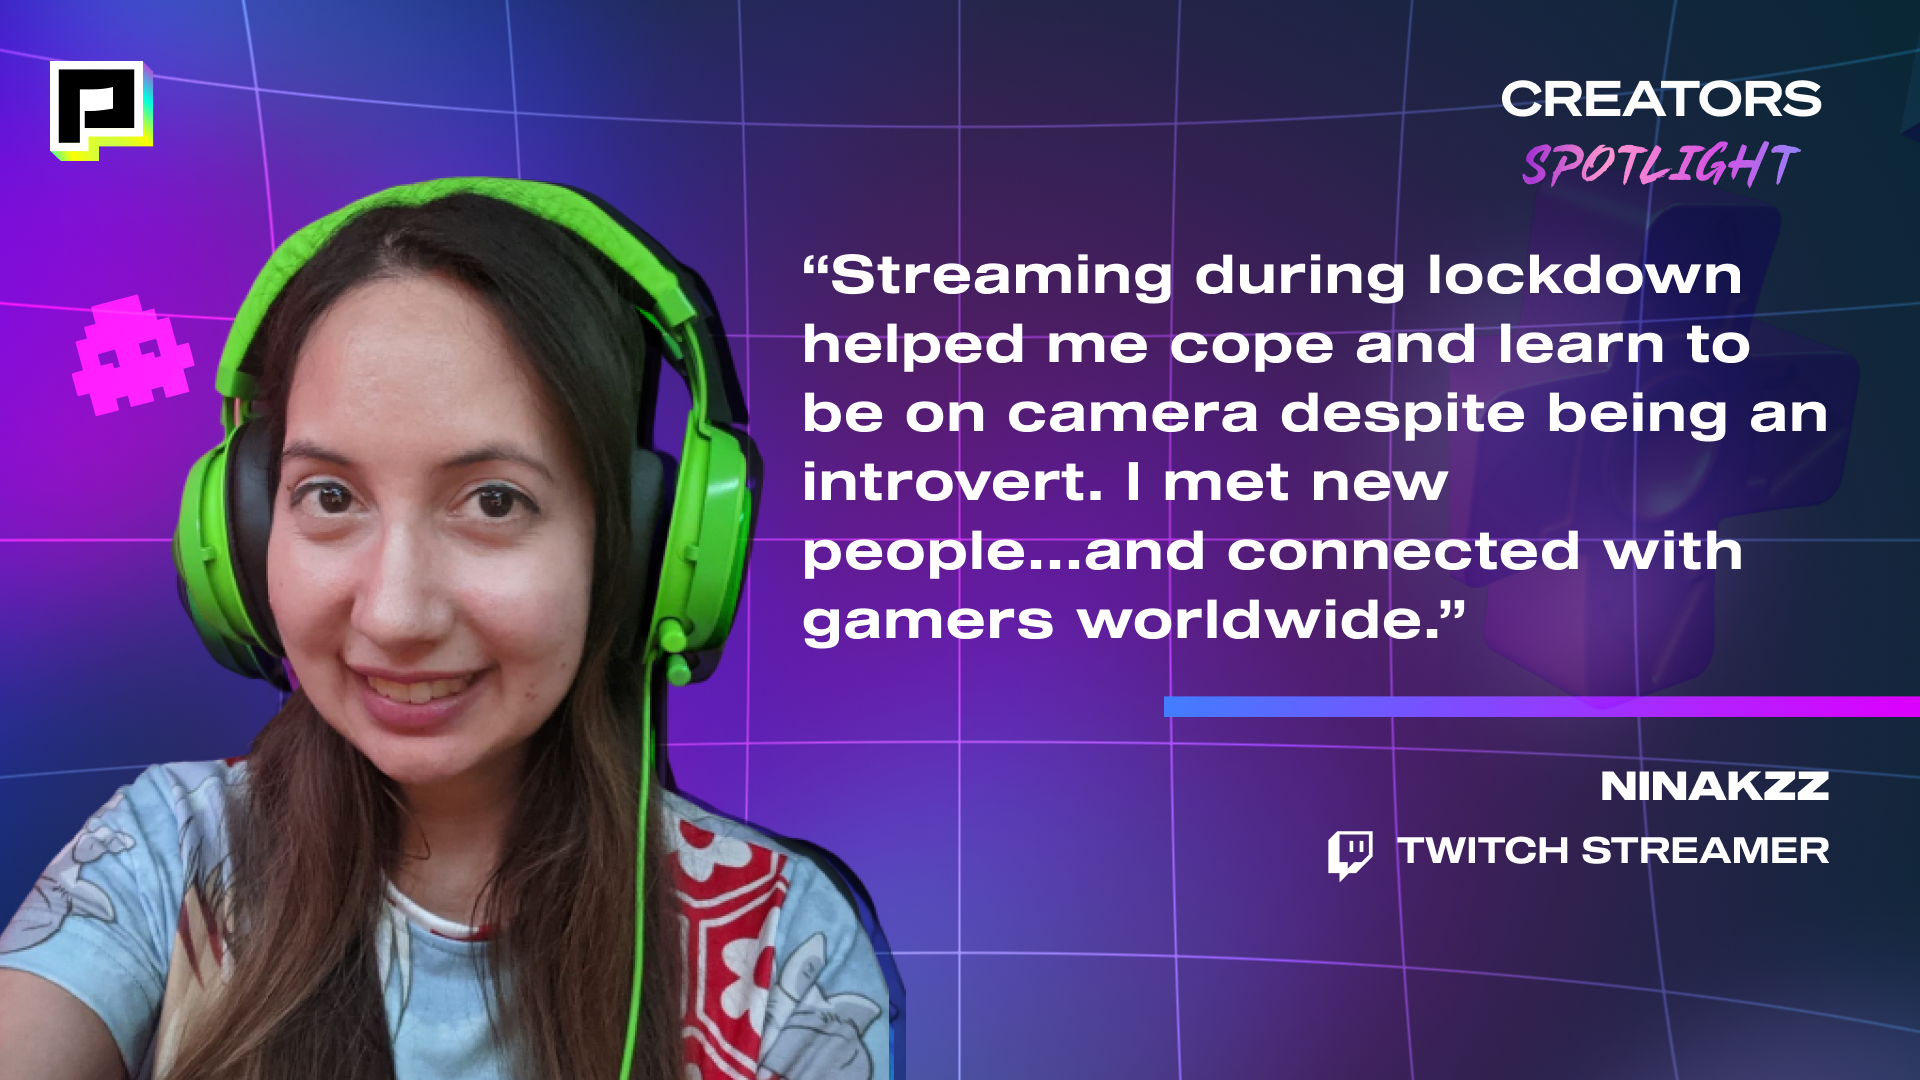 Image of Twitch Streamer, NINAKZZ with her quote, "Streaming during lockdown helped me cope and learn to be on camera despite being an introvert. I met new people...and connected with gamers worldwide."